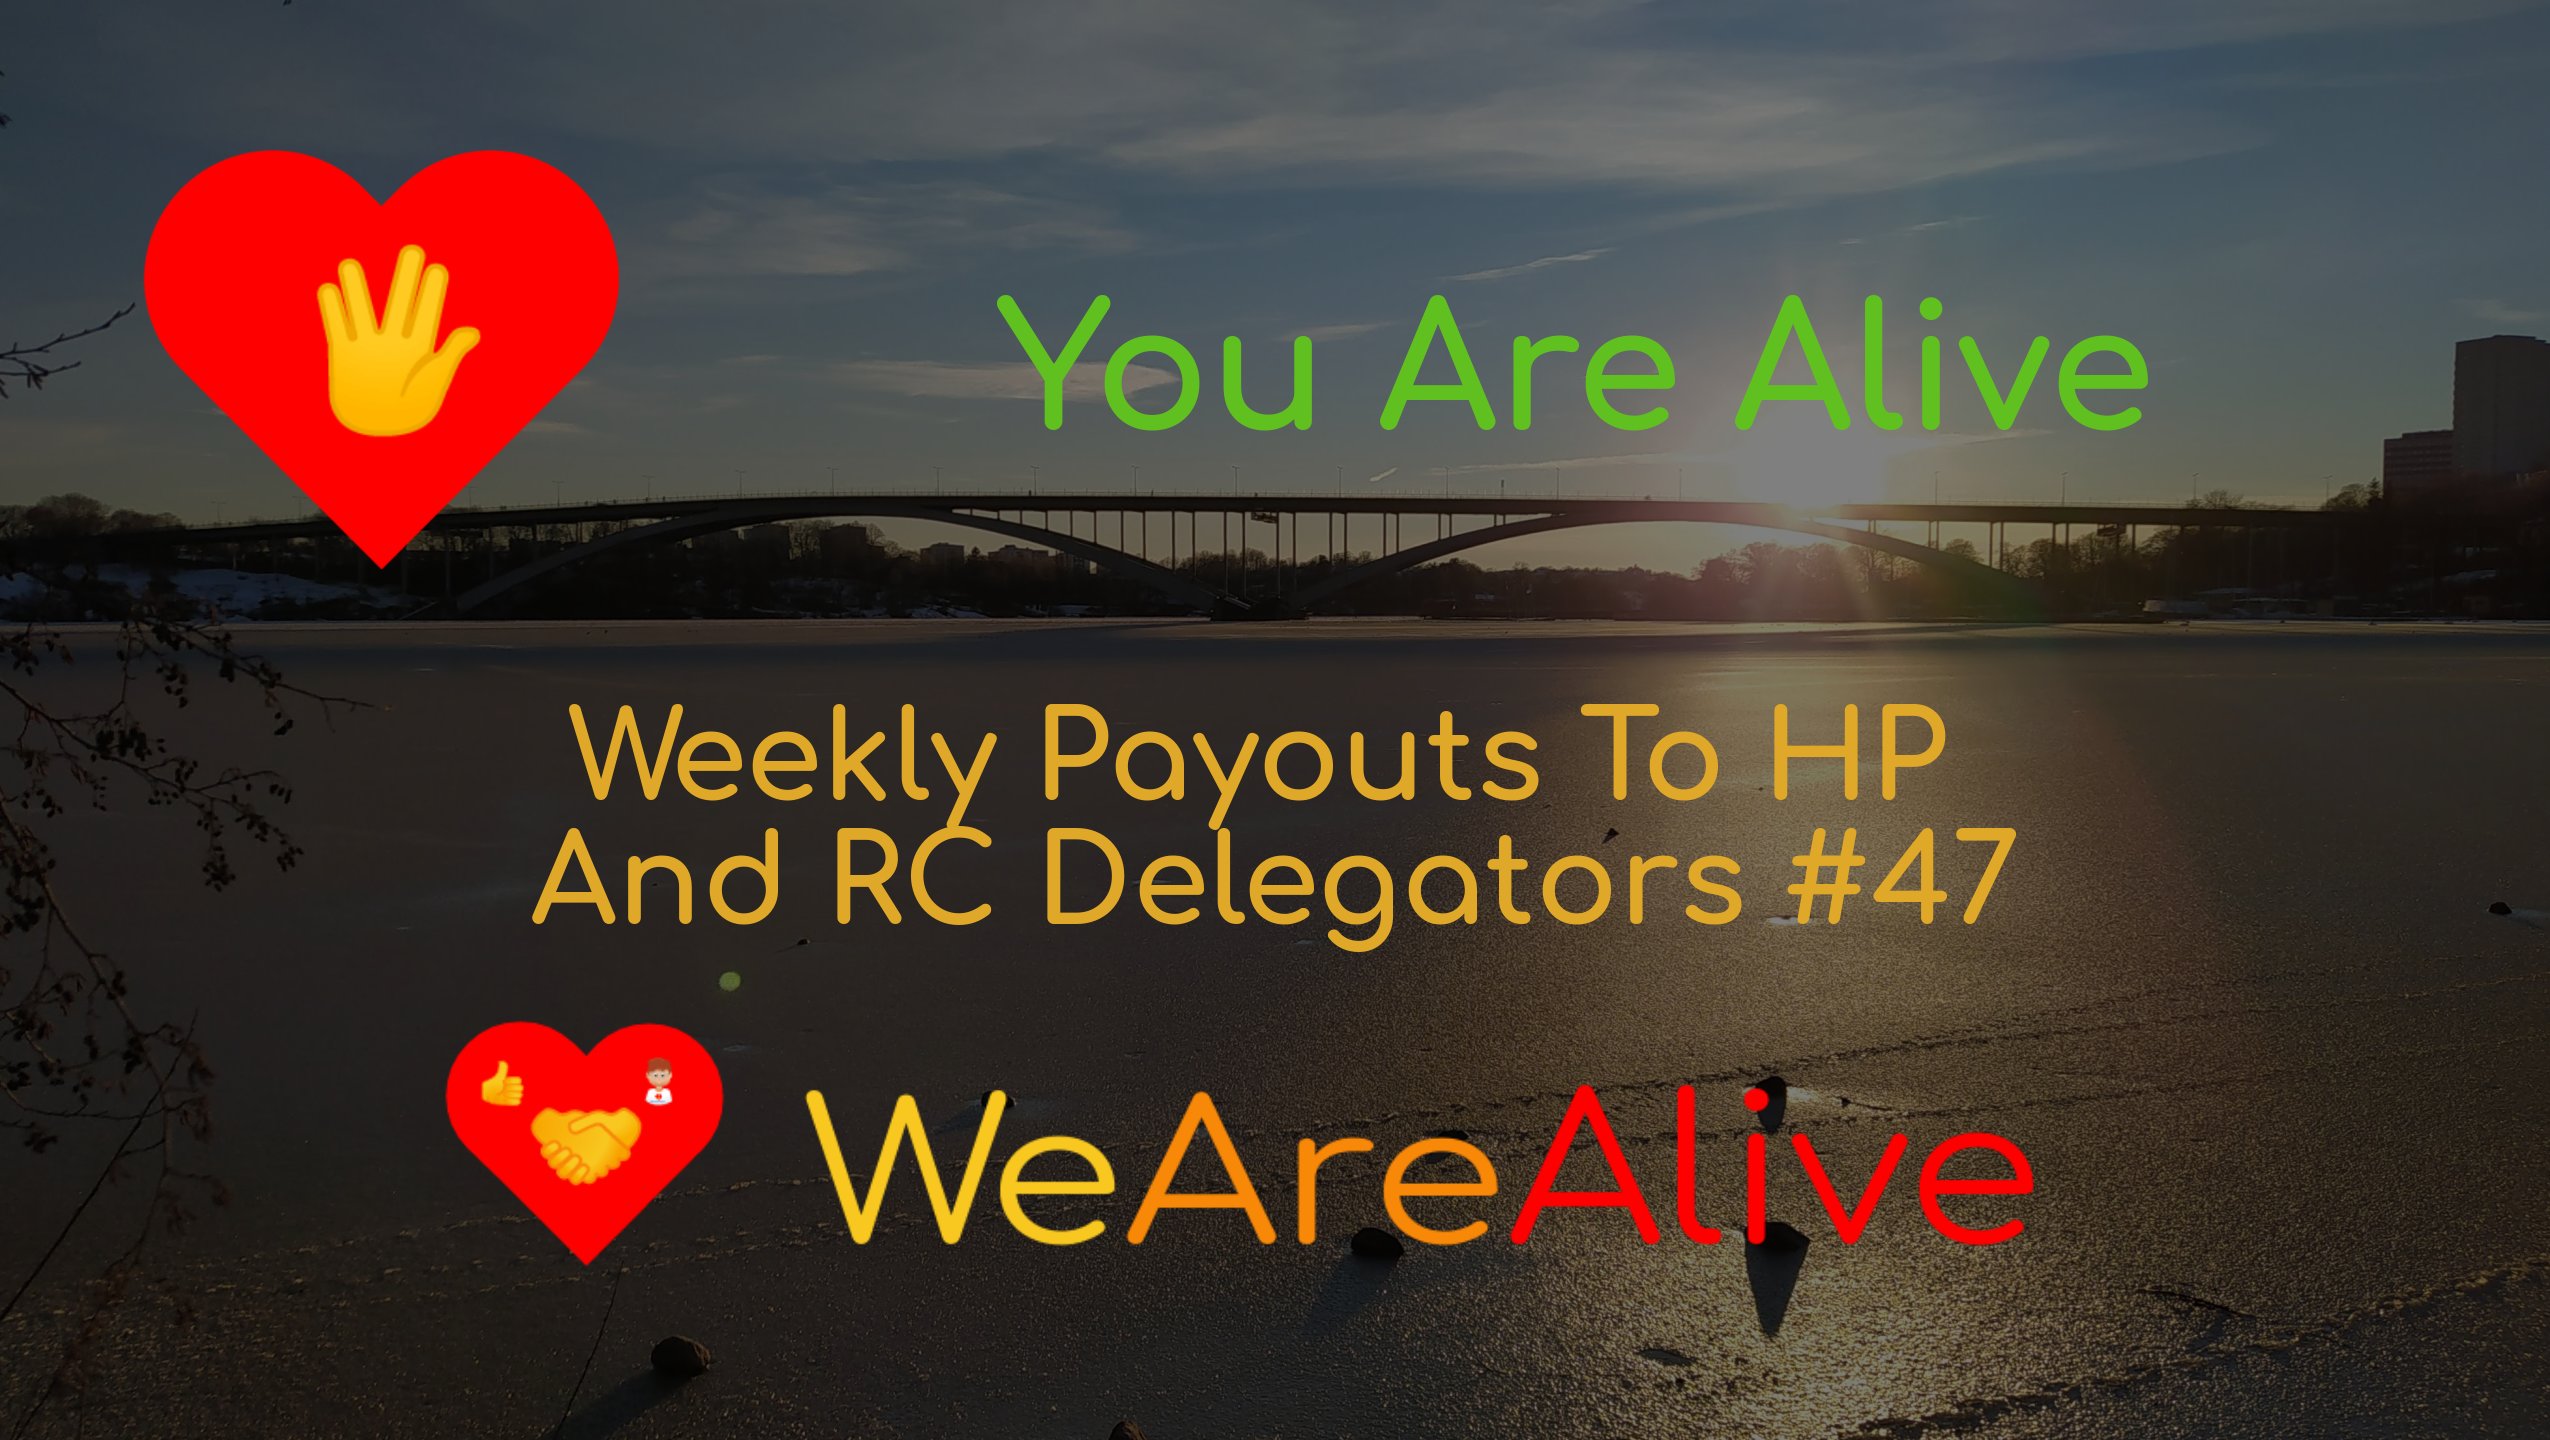 @youarealive/you-are-alive-weekly-payouts-to-hp-and-rc-delegators-47